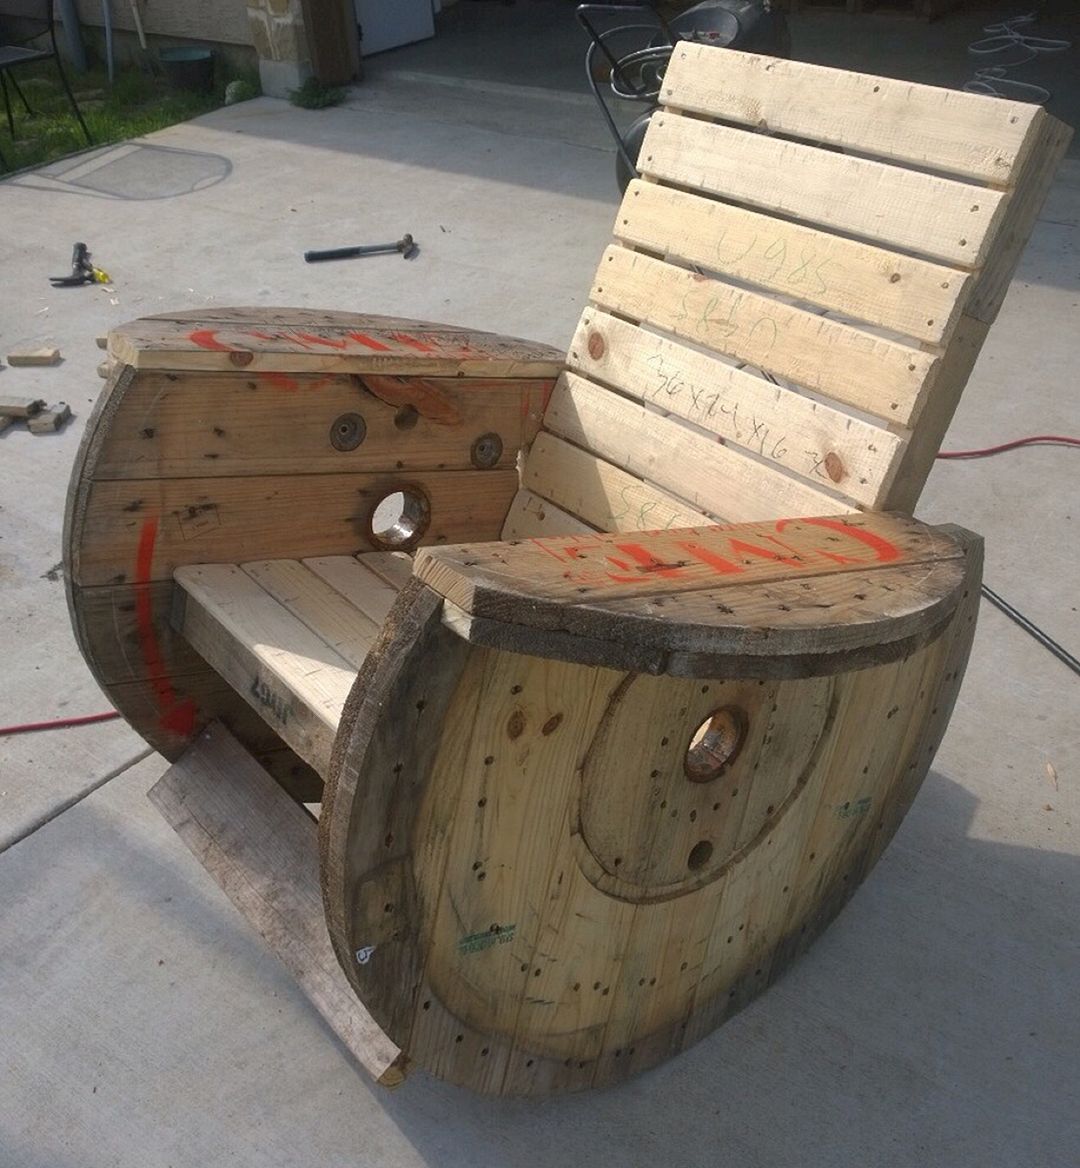 DIY Wooden Pallet and Wire Spool For Chair